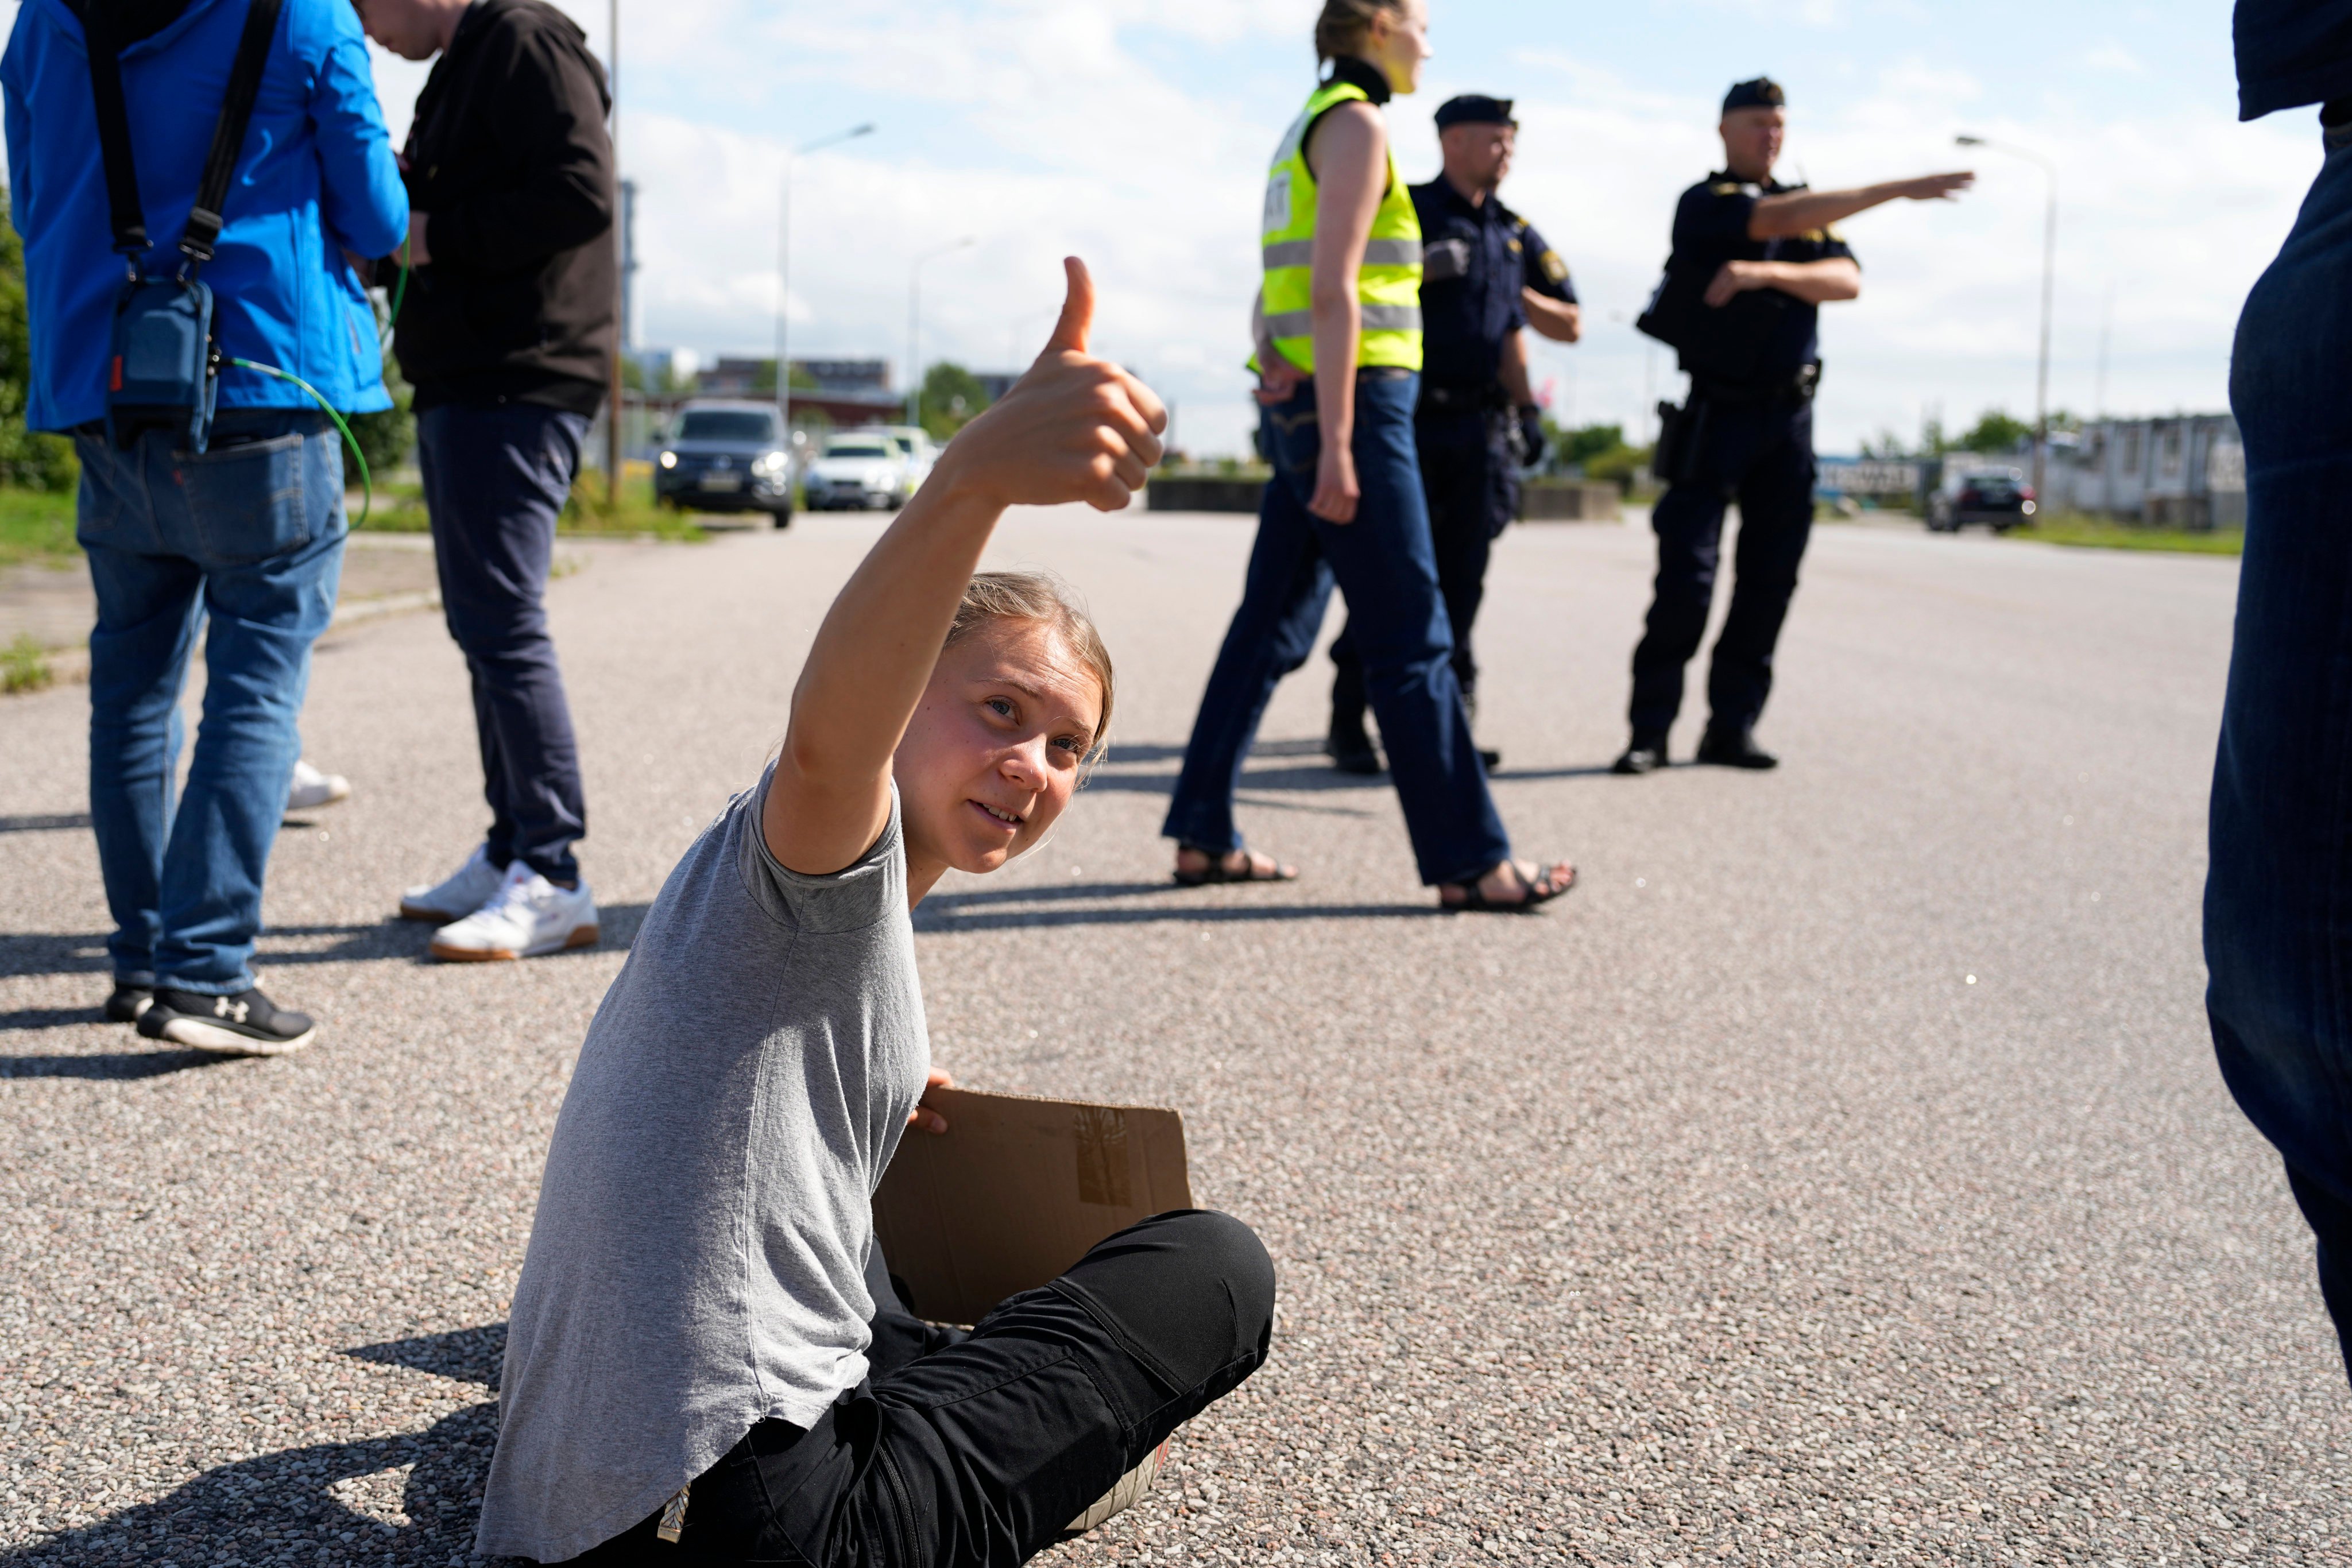 Climate activist Greta Thunberg gestures while blocking the entrance to an oil facility in Malmo, Sweden, on July 24 last year. Photo: AP